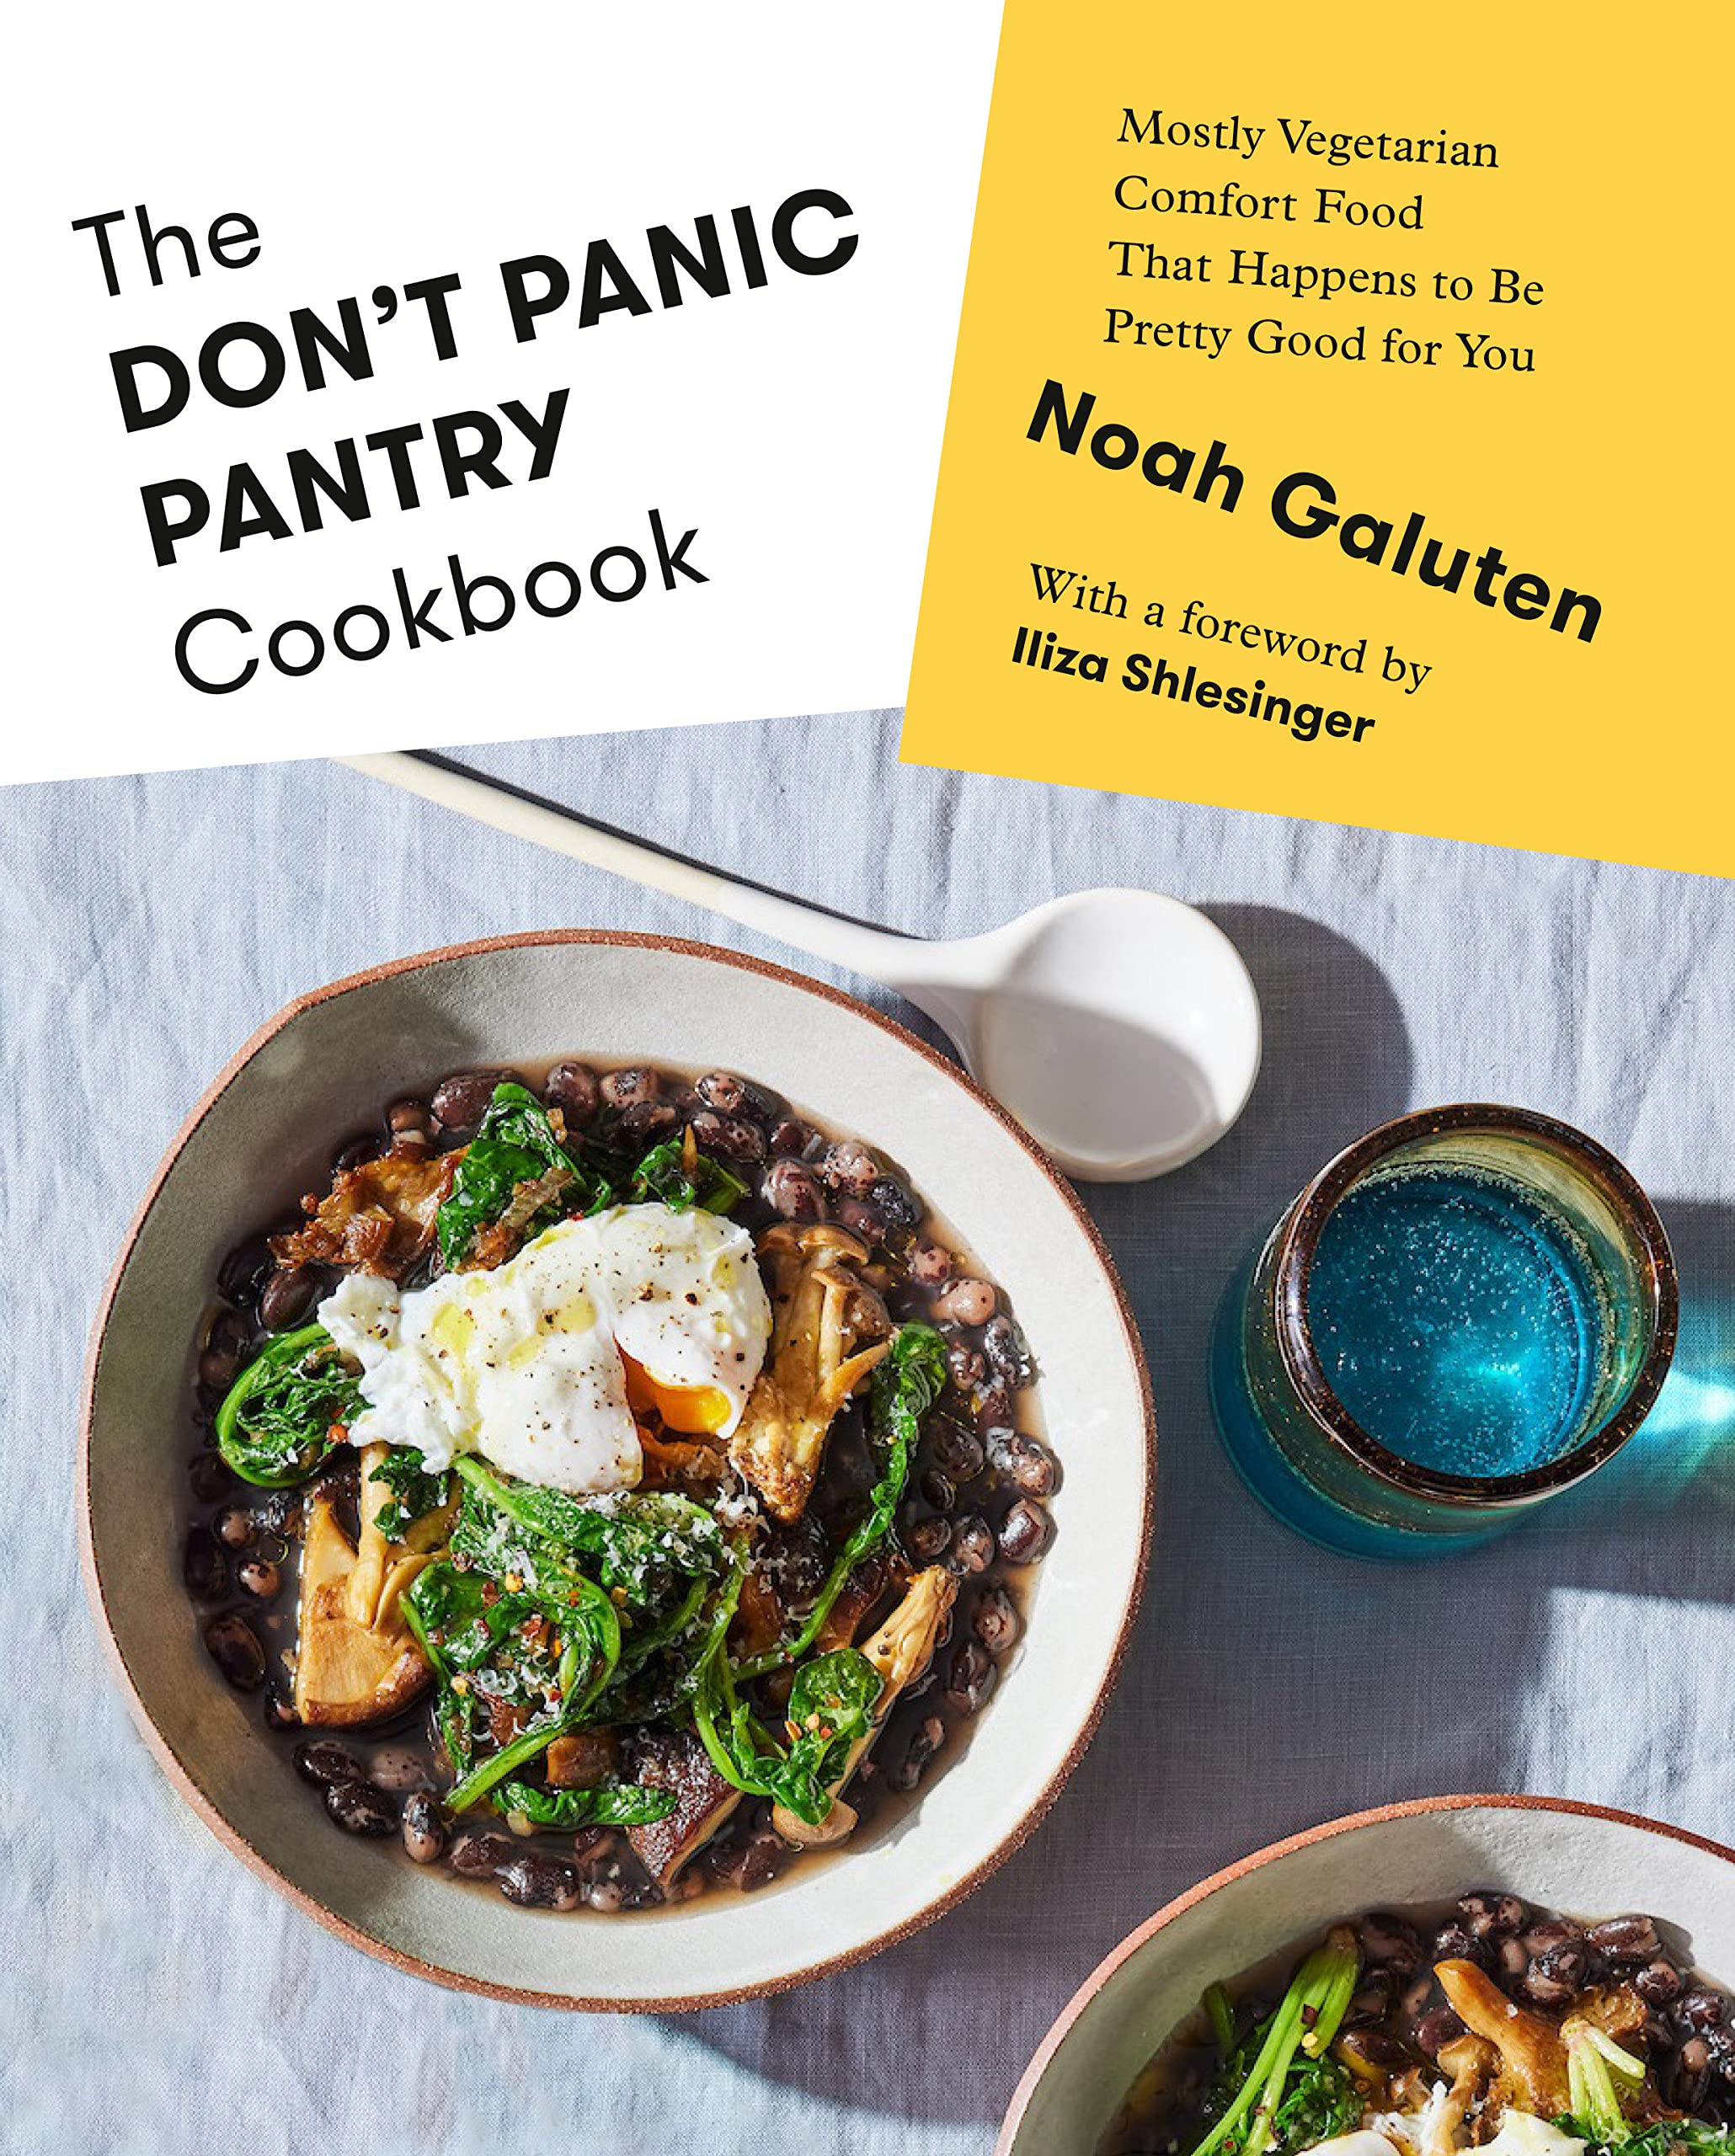 The Don't Panic Pantry Cookbook: Mostly Vegetarian Comfort Food That Happens to Be Pretty Good for You (Noah Galuten) *Signed*